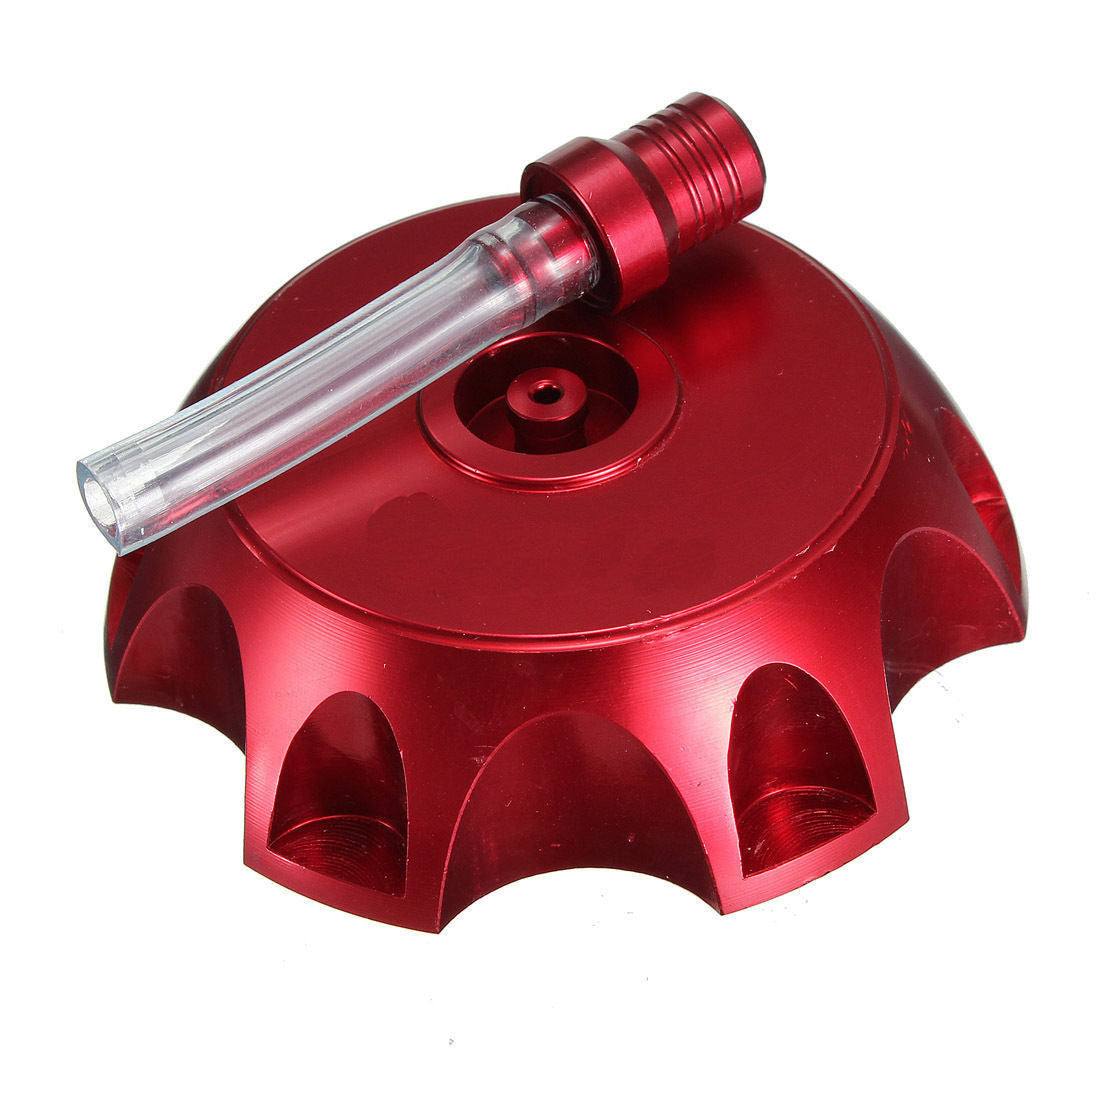 Gas Tank Cap Cover Aluminum For Stomp YCF DHZ Thumpstar Pit Dirt Bikes Red - TDRMOTO